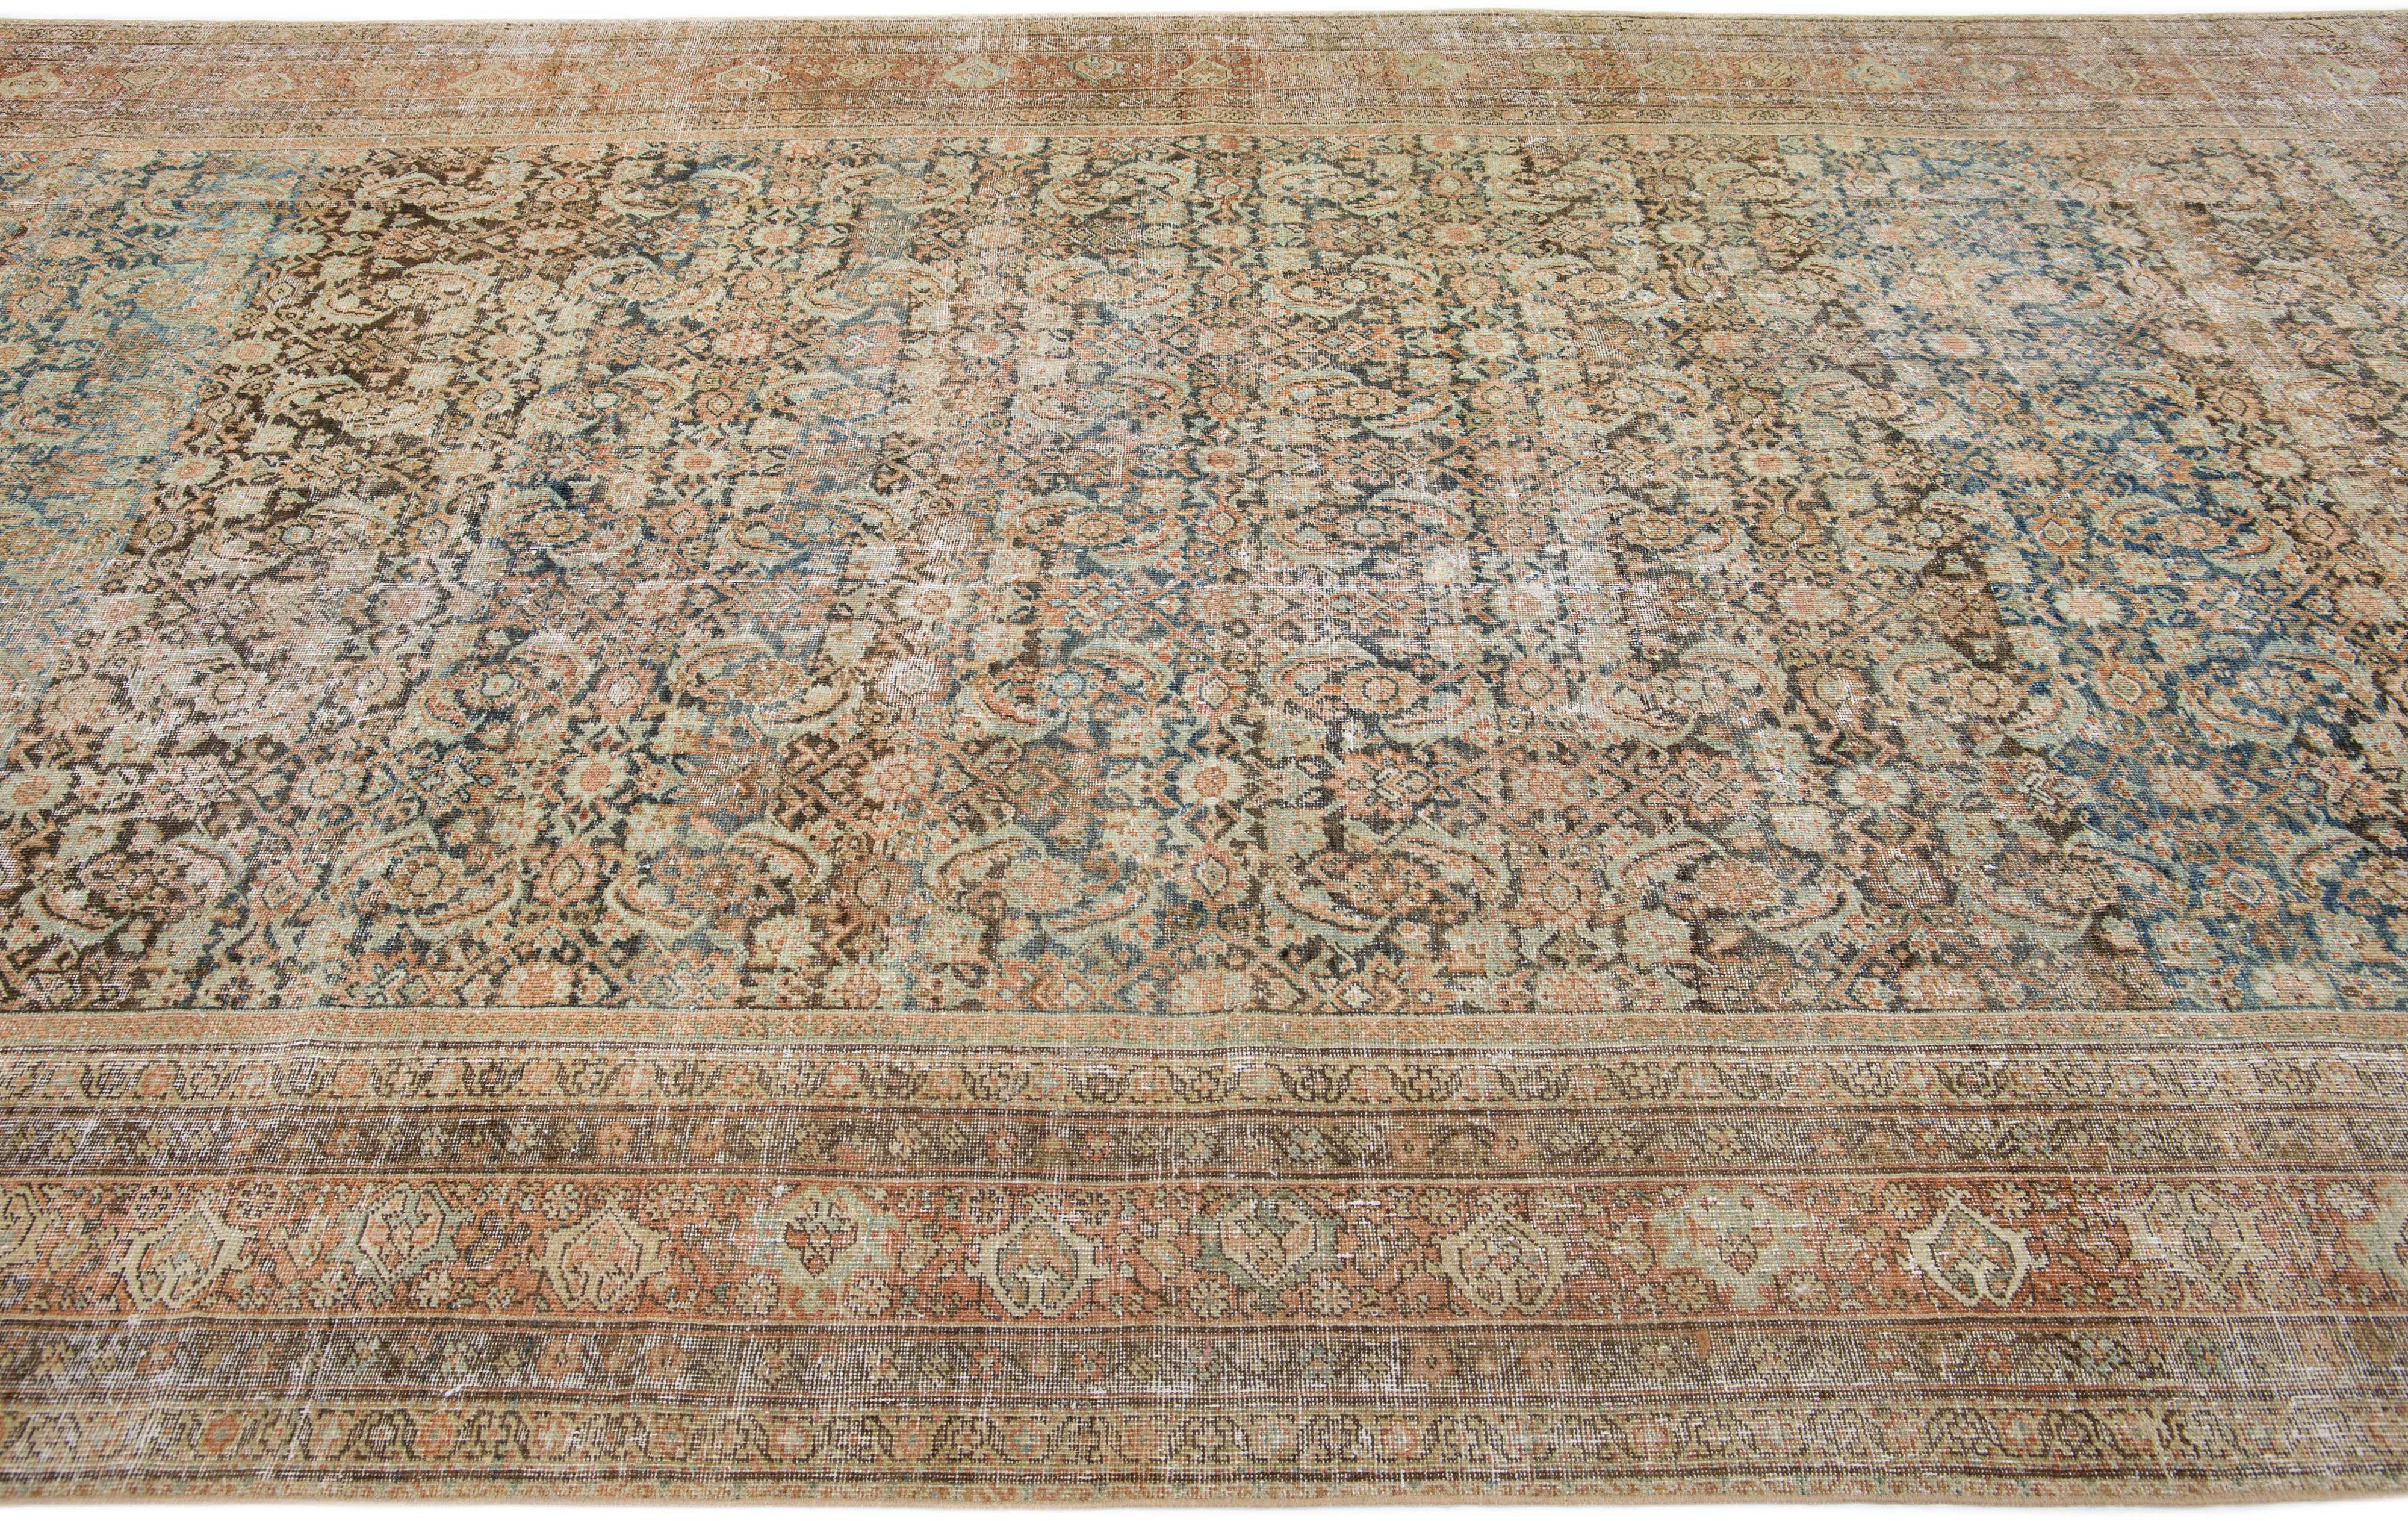 Oversize Antique Persian Malayer Blue Handmade Wool Rug with Allover Motif In Distressed Condition For Sale In Norwalk, CT